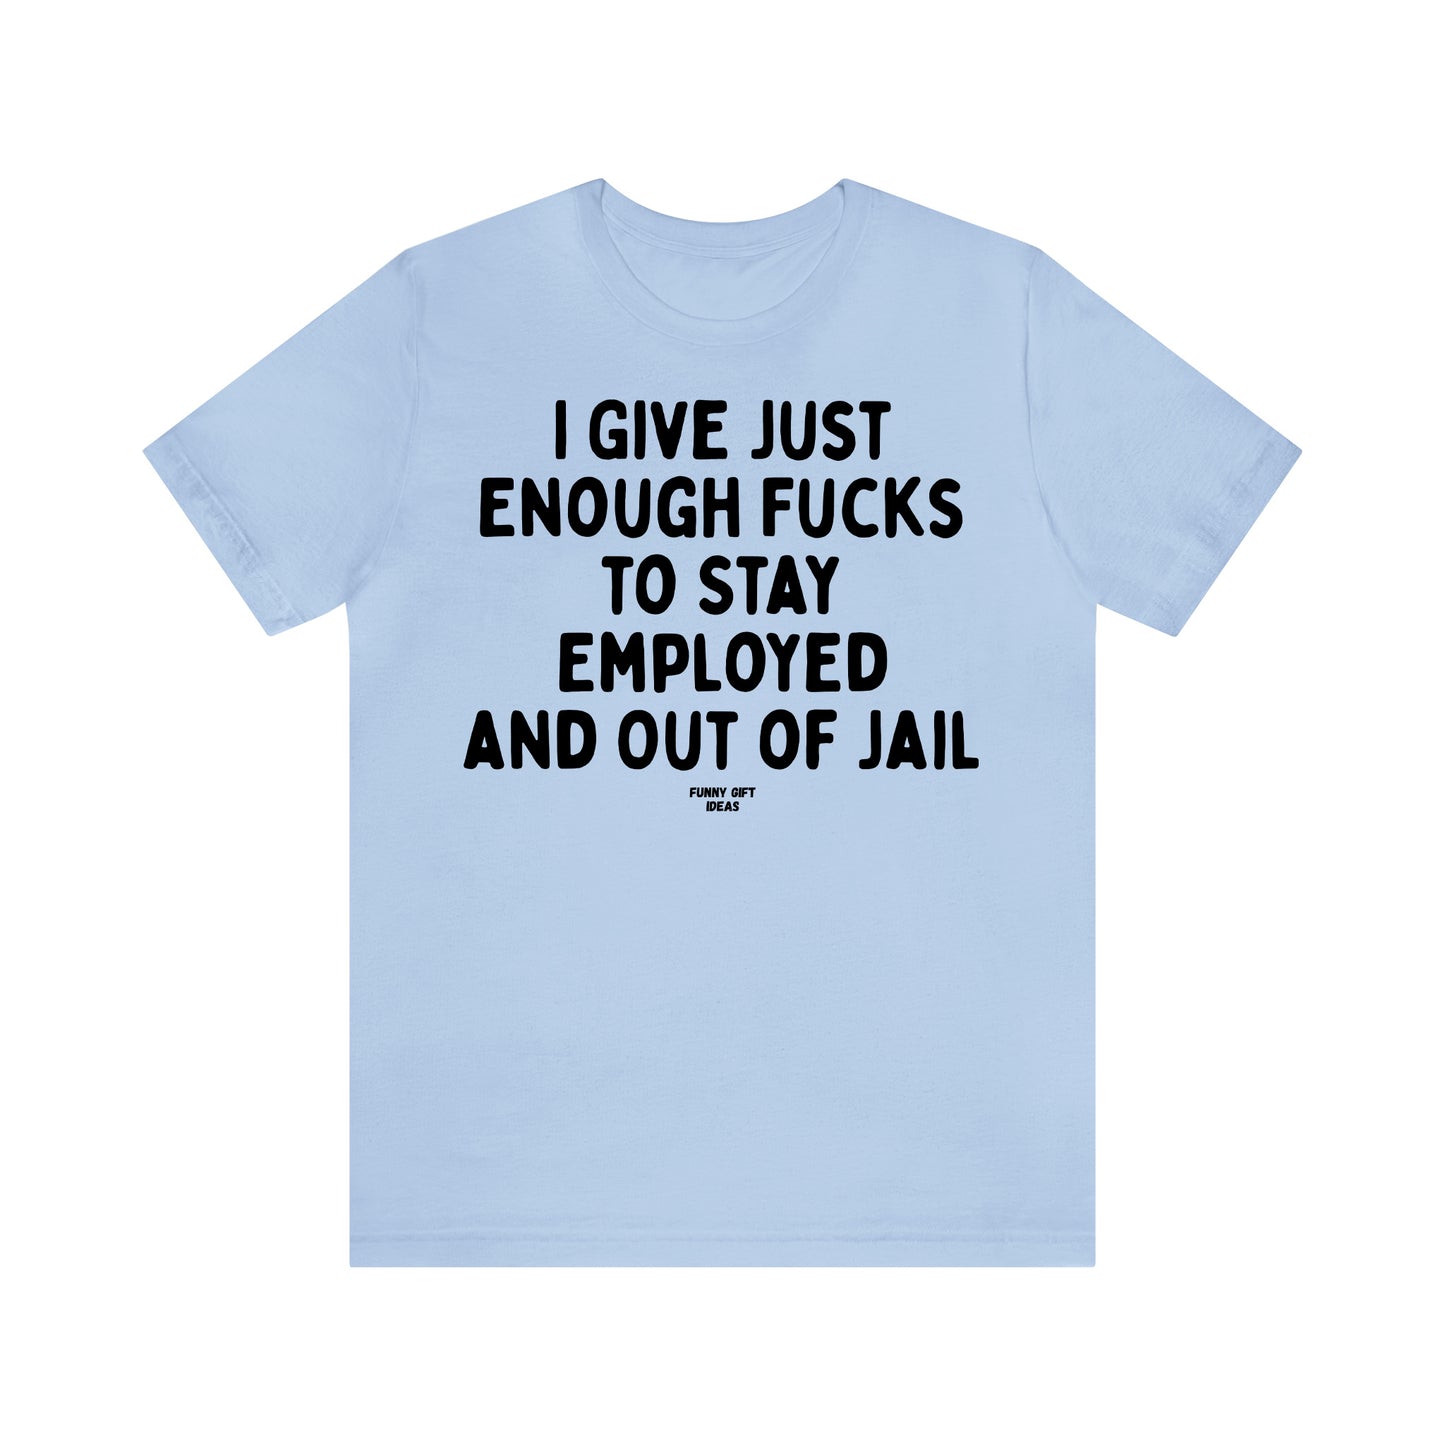 Funny Shirts for Women - I Give Just Enough Fucks to Stay Employed and Out of Jail - Women's T Shirts